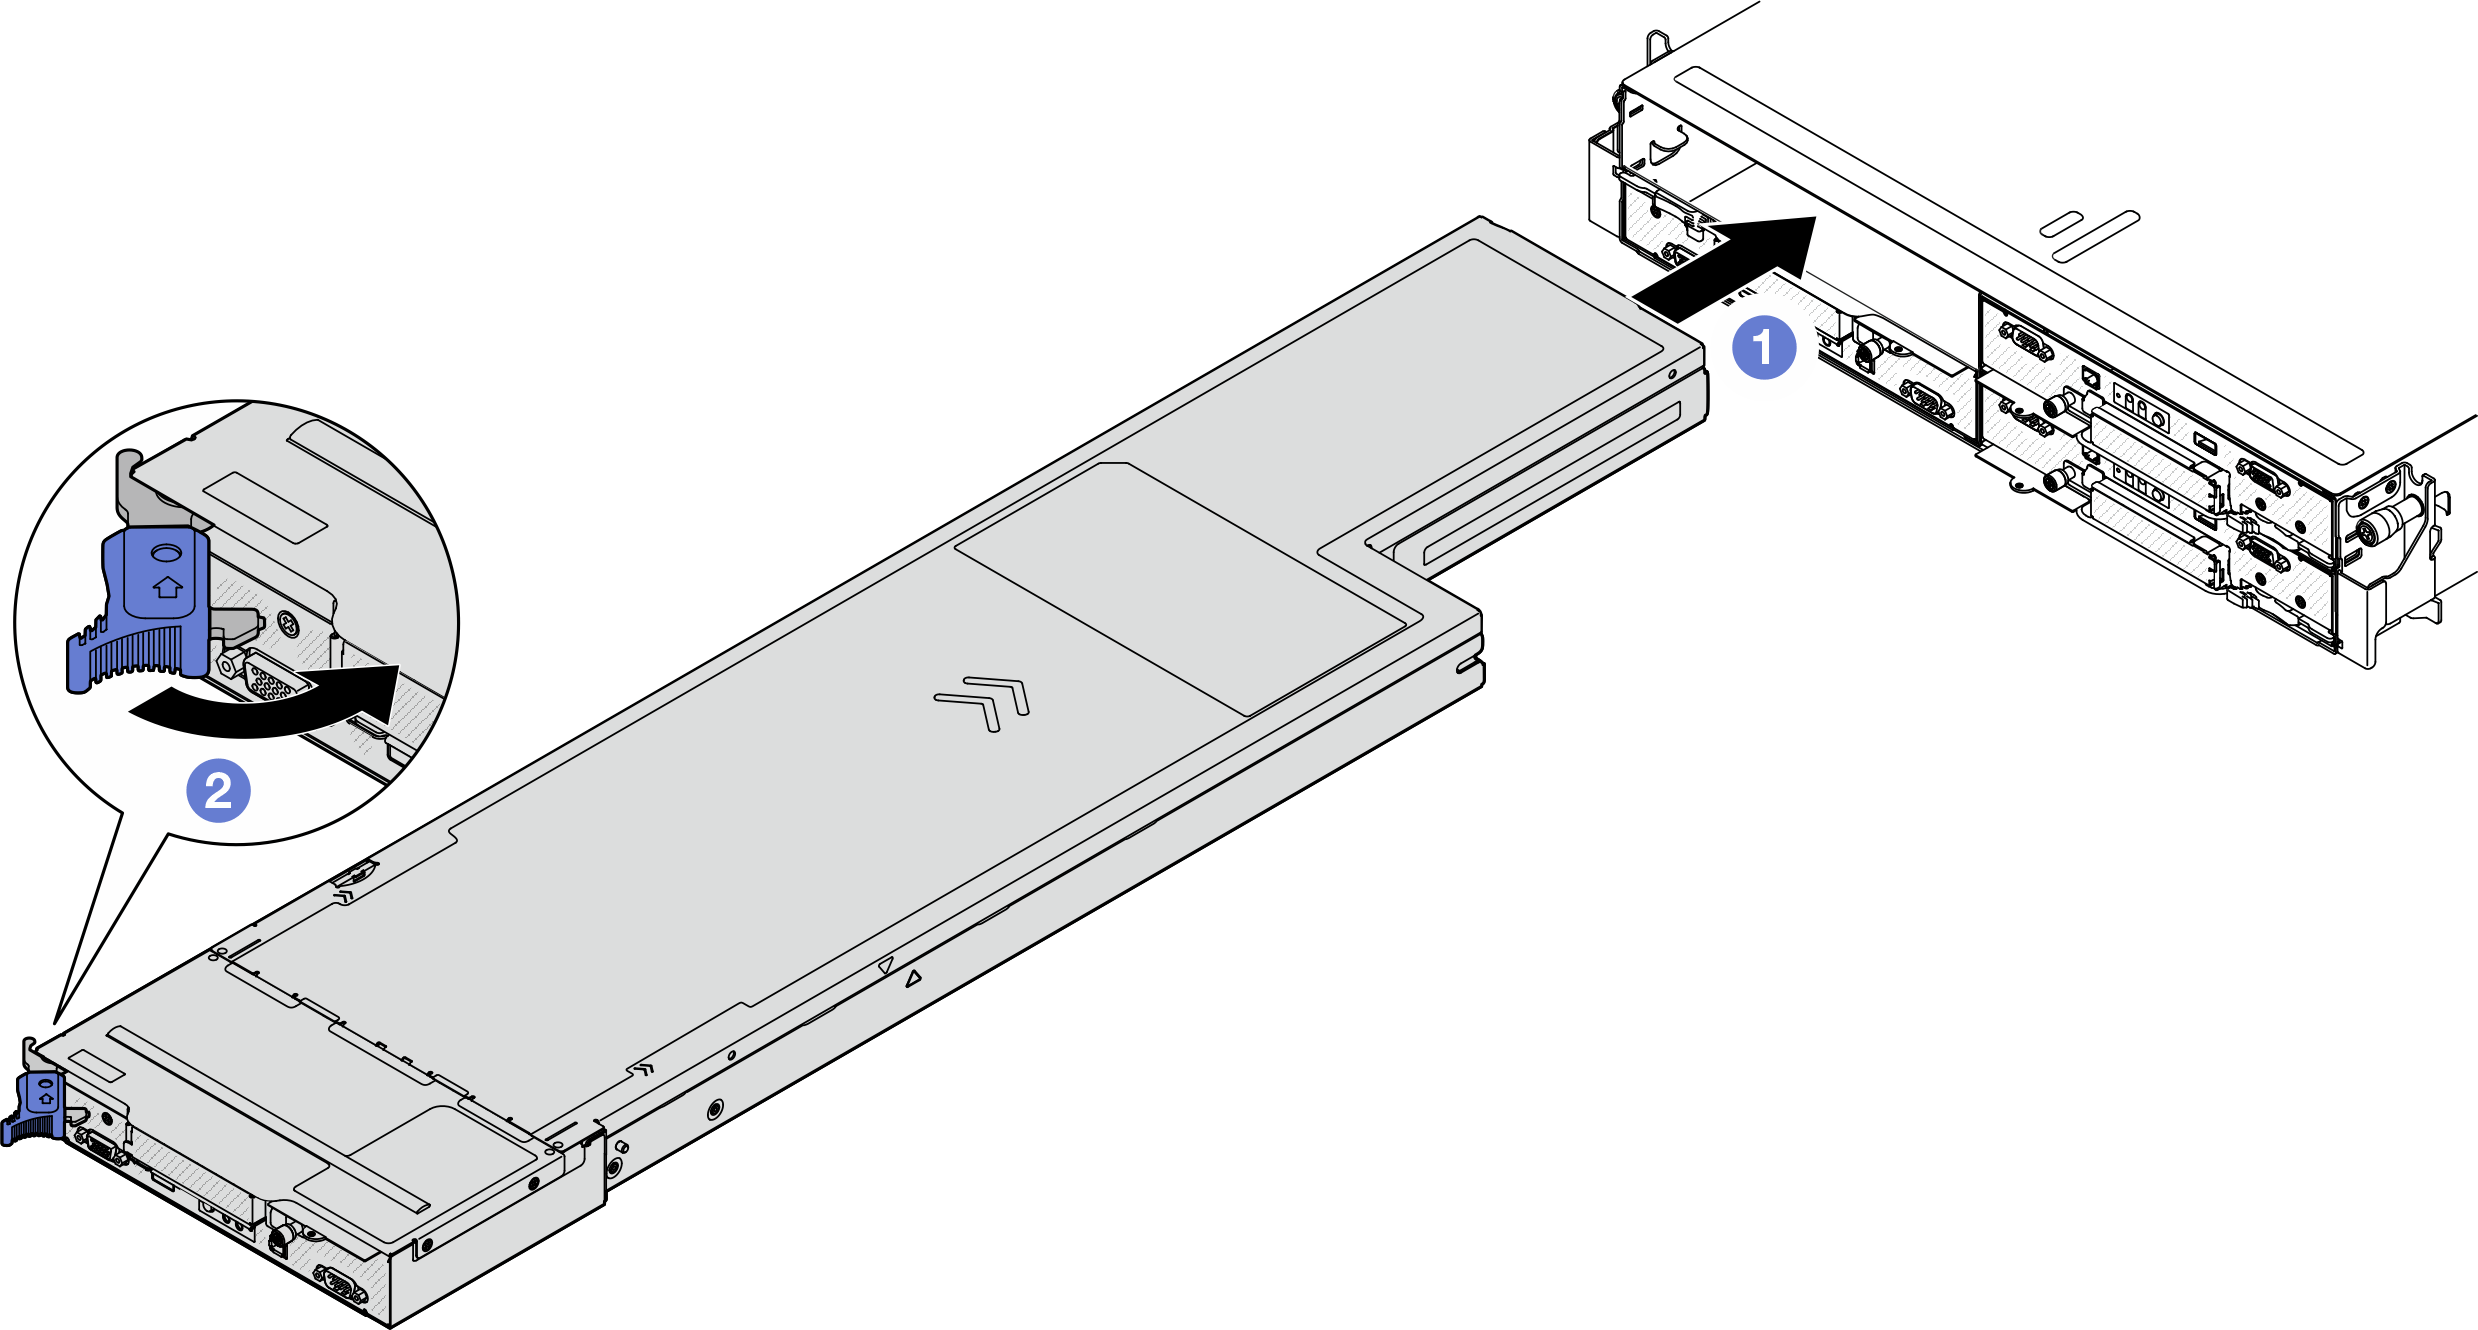 Node installation to a left tray